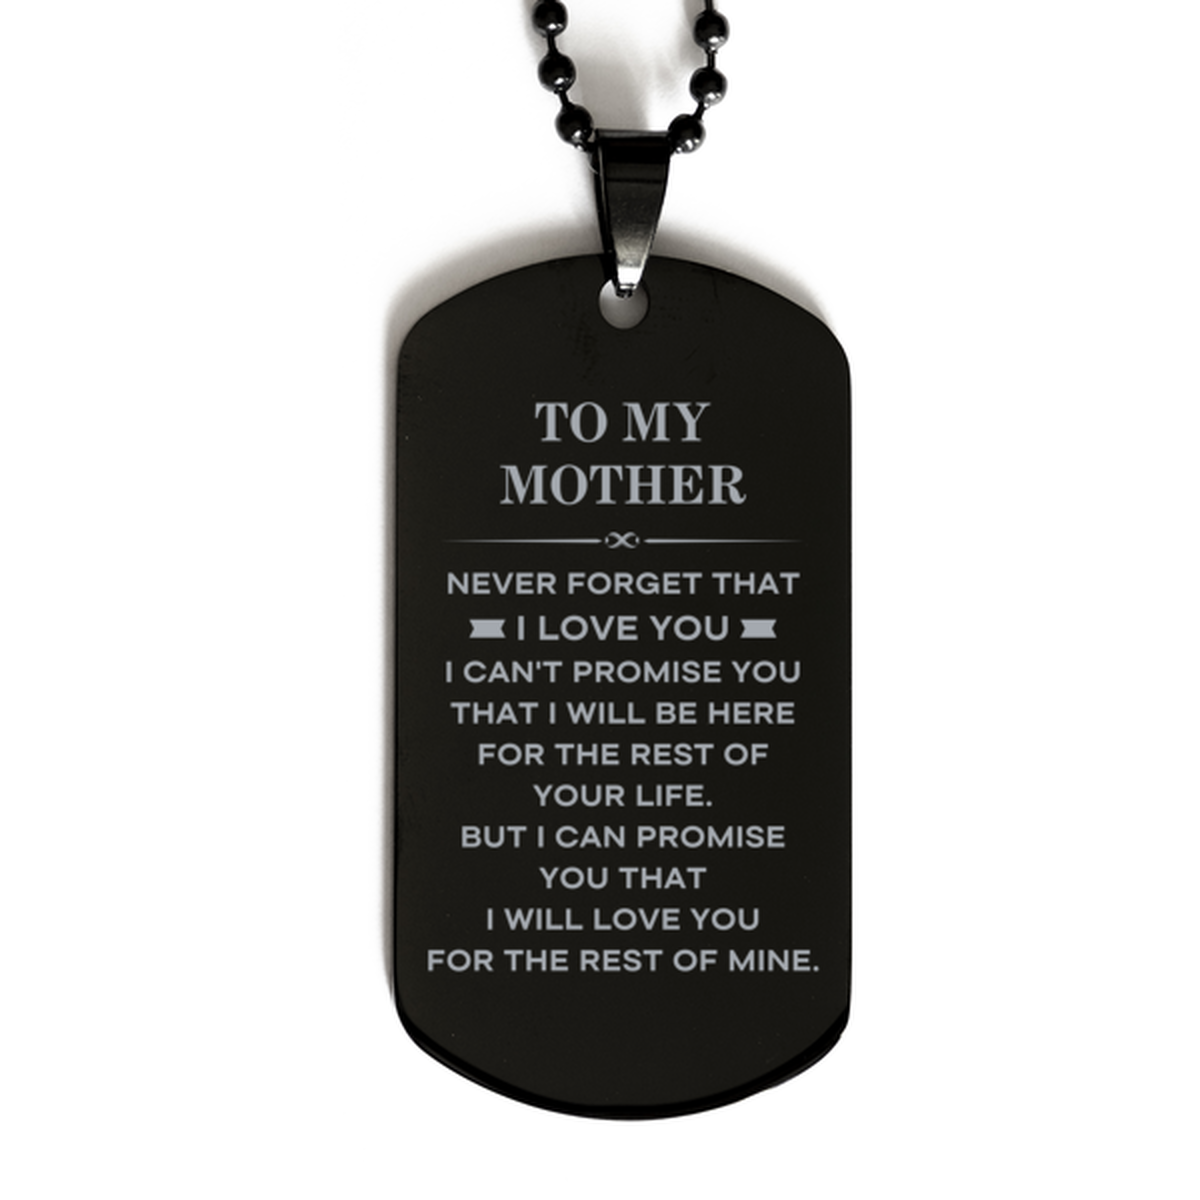 To My Mother Gifts, I will love you for the rest of mine, Love Mother Dog Tag Necklace, Birthday Christmas Unique Black Dog Tag For Mother